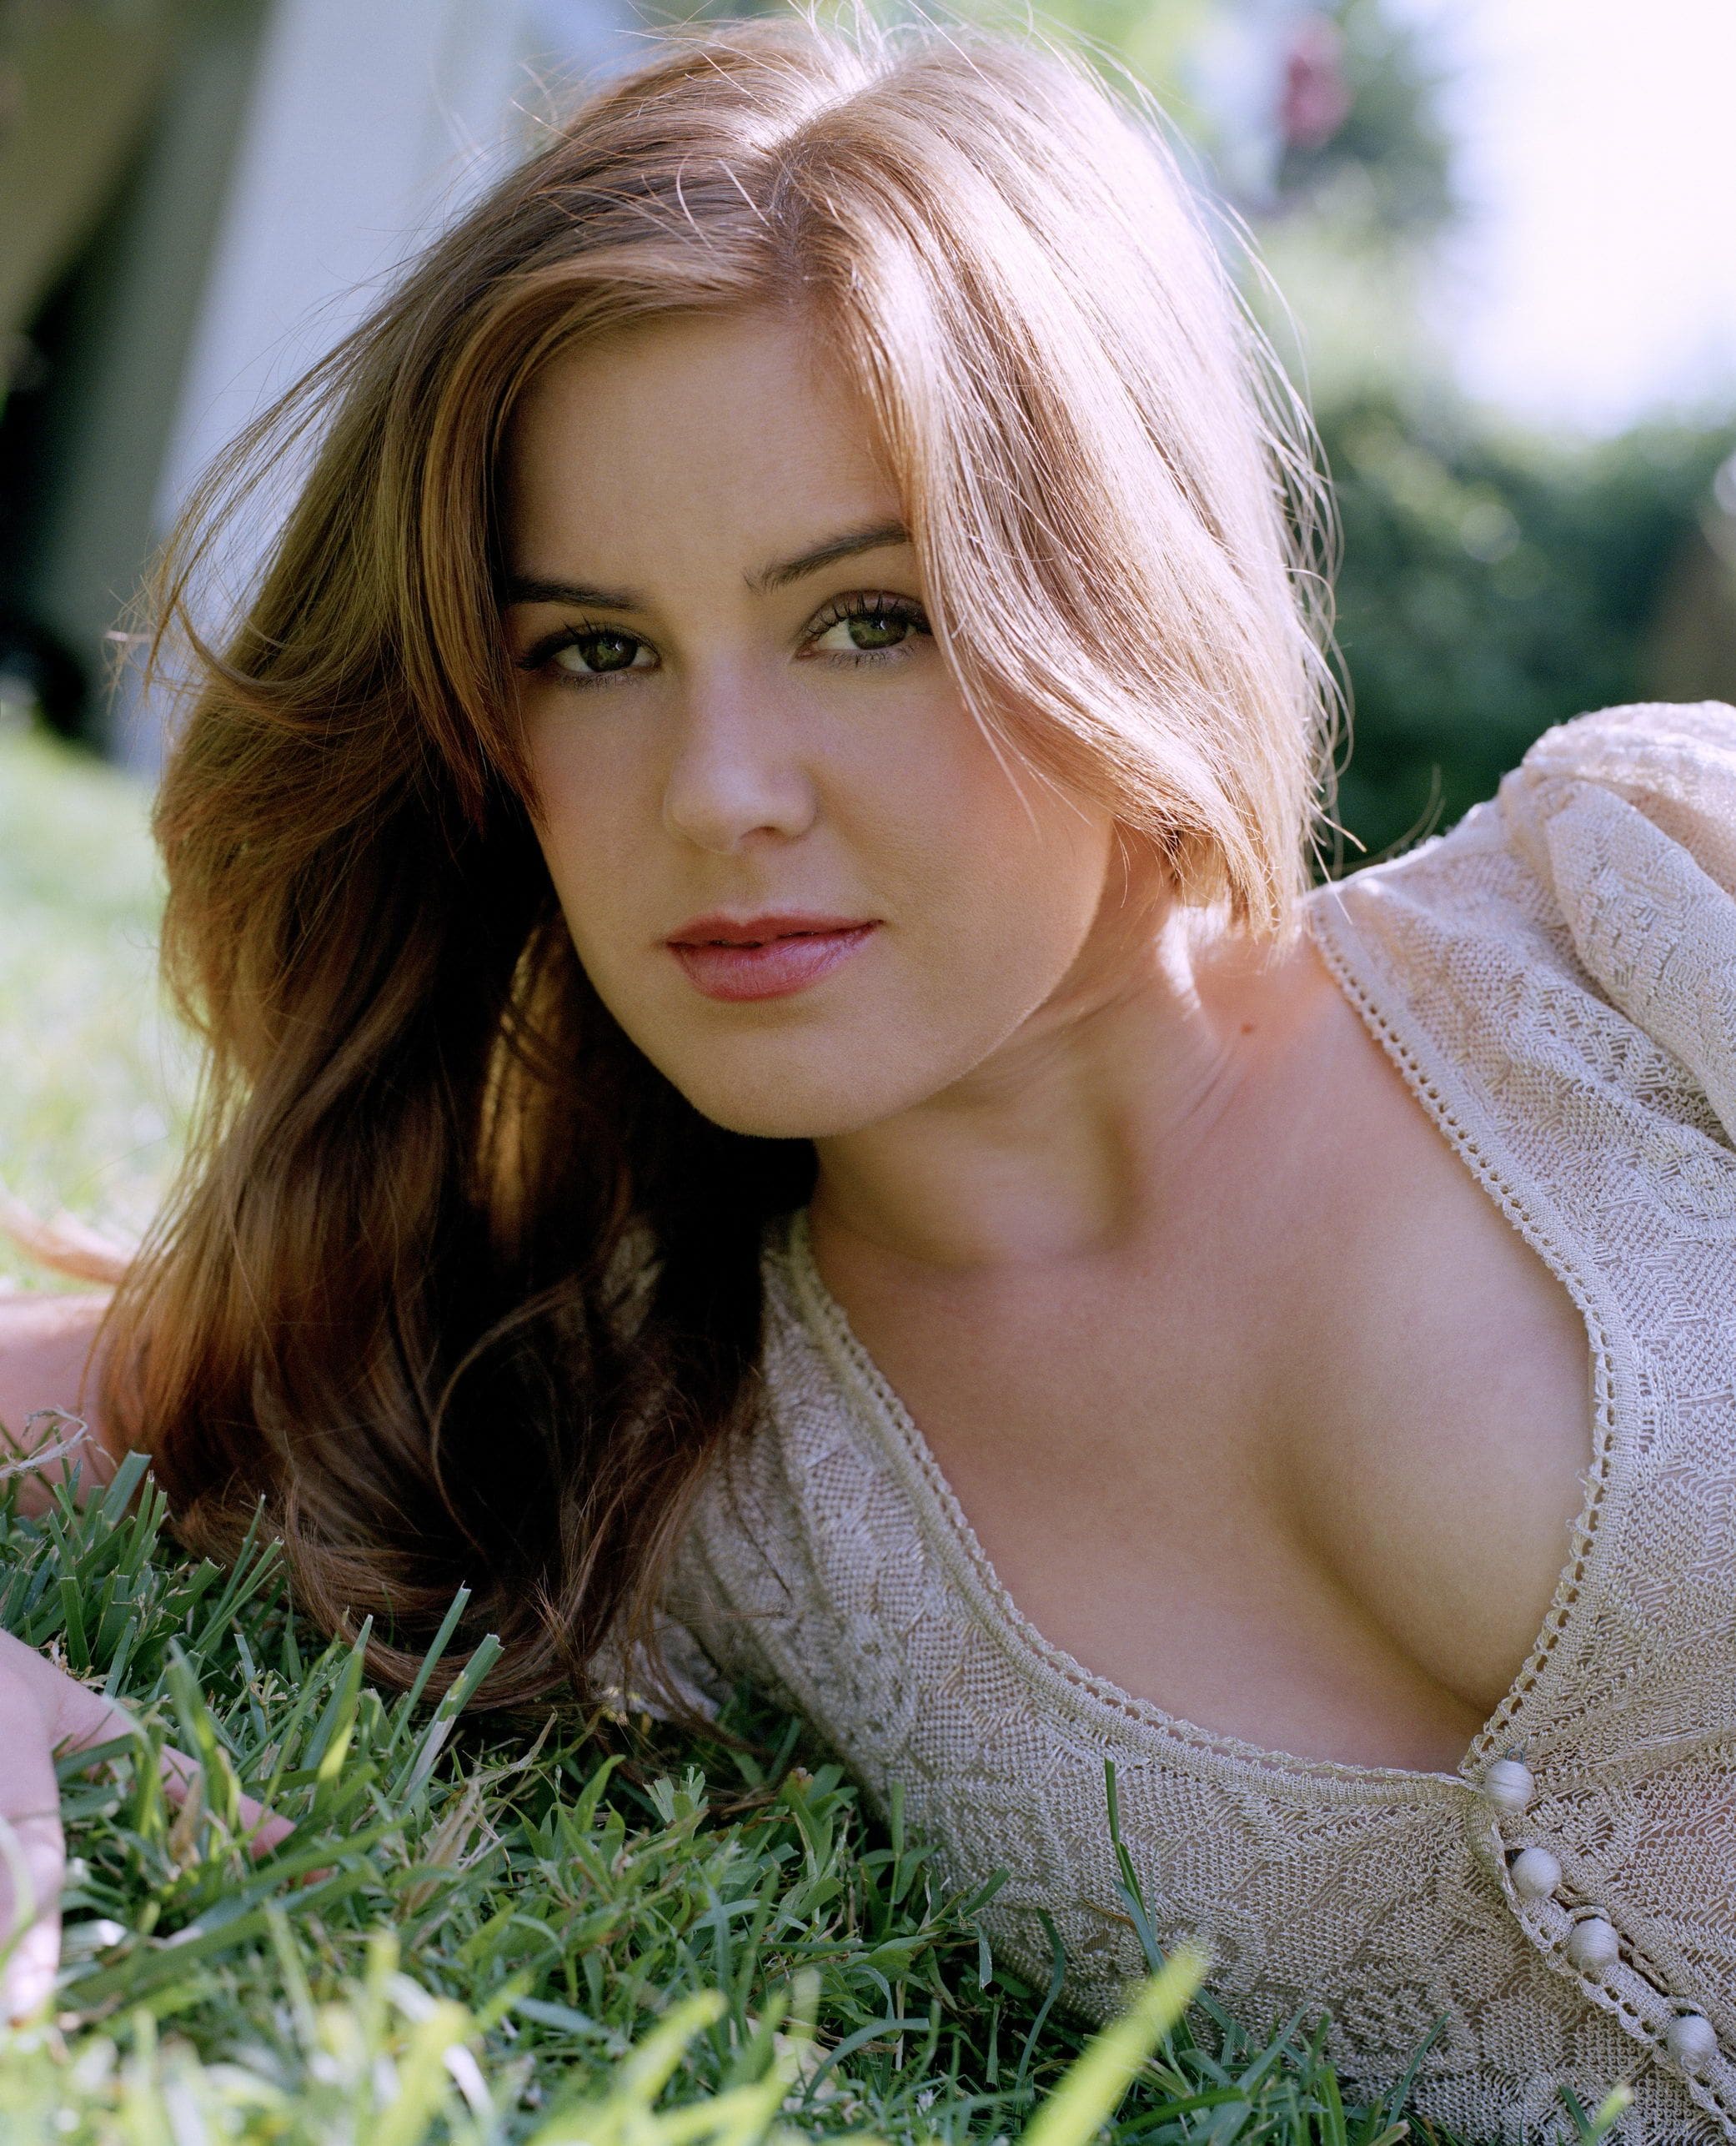 The Hottest Photos Of Isla Fisher.